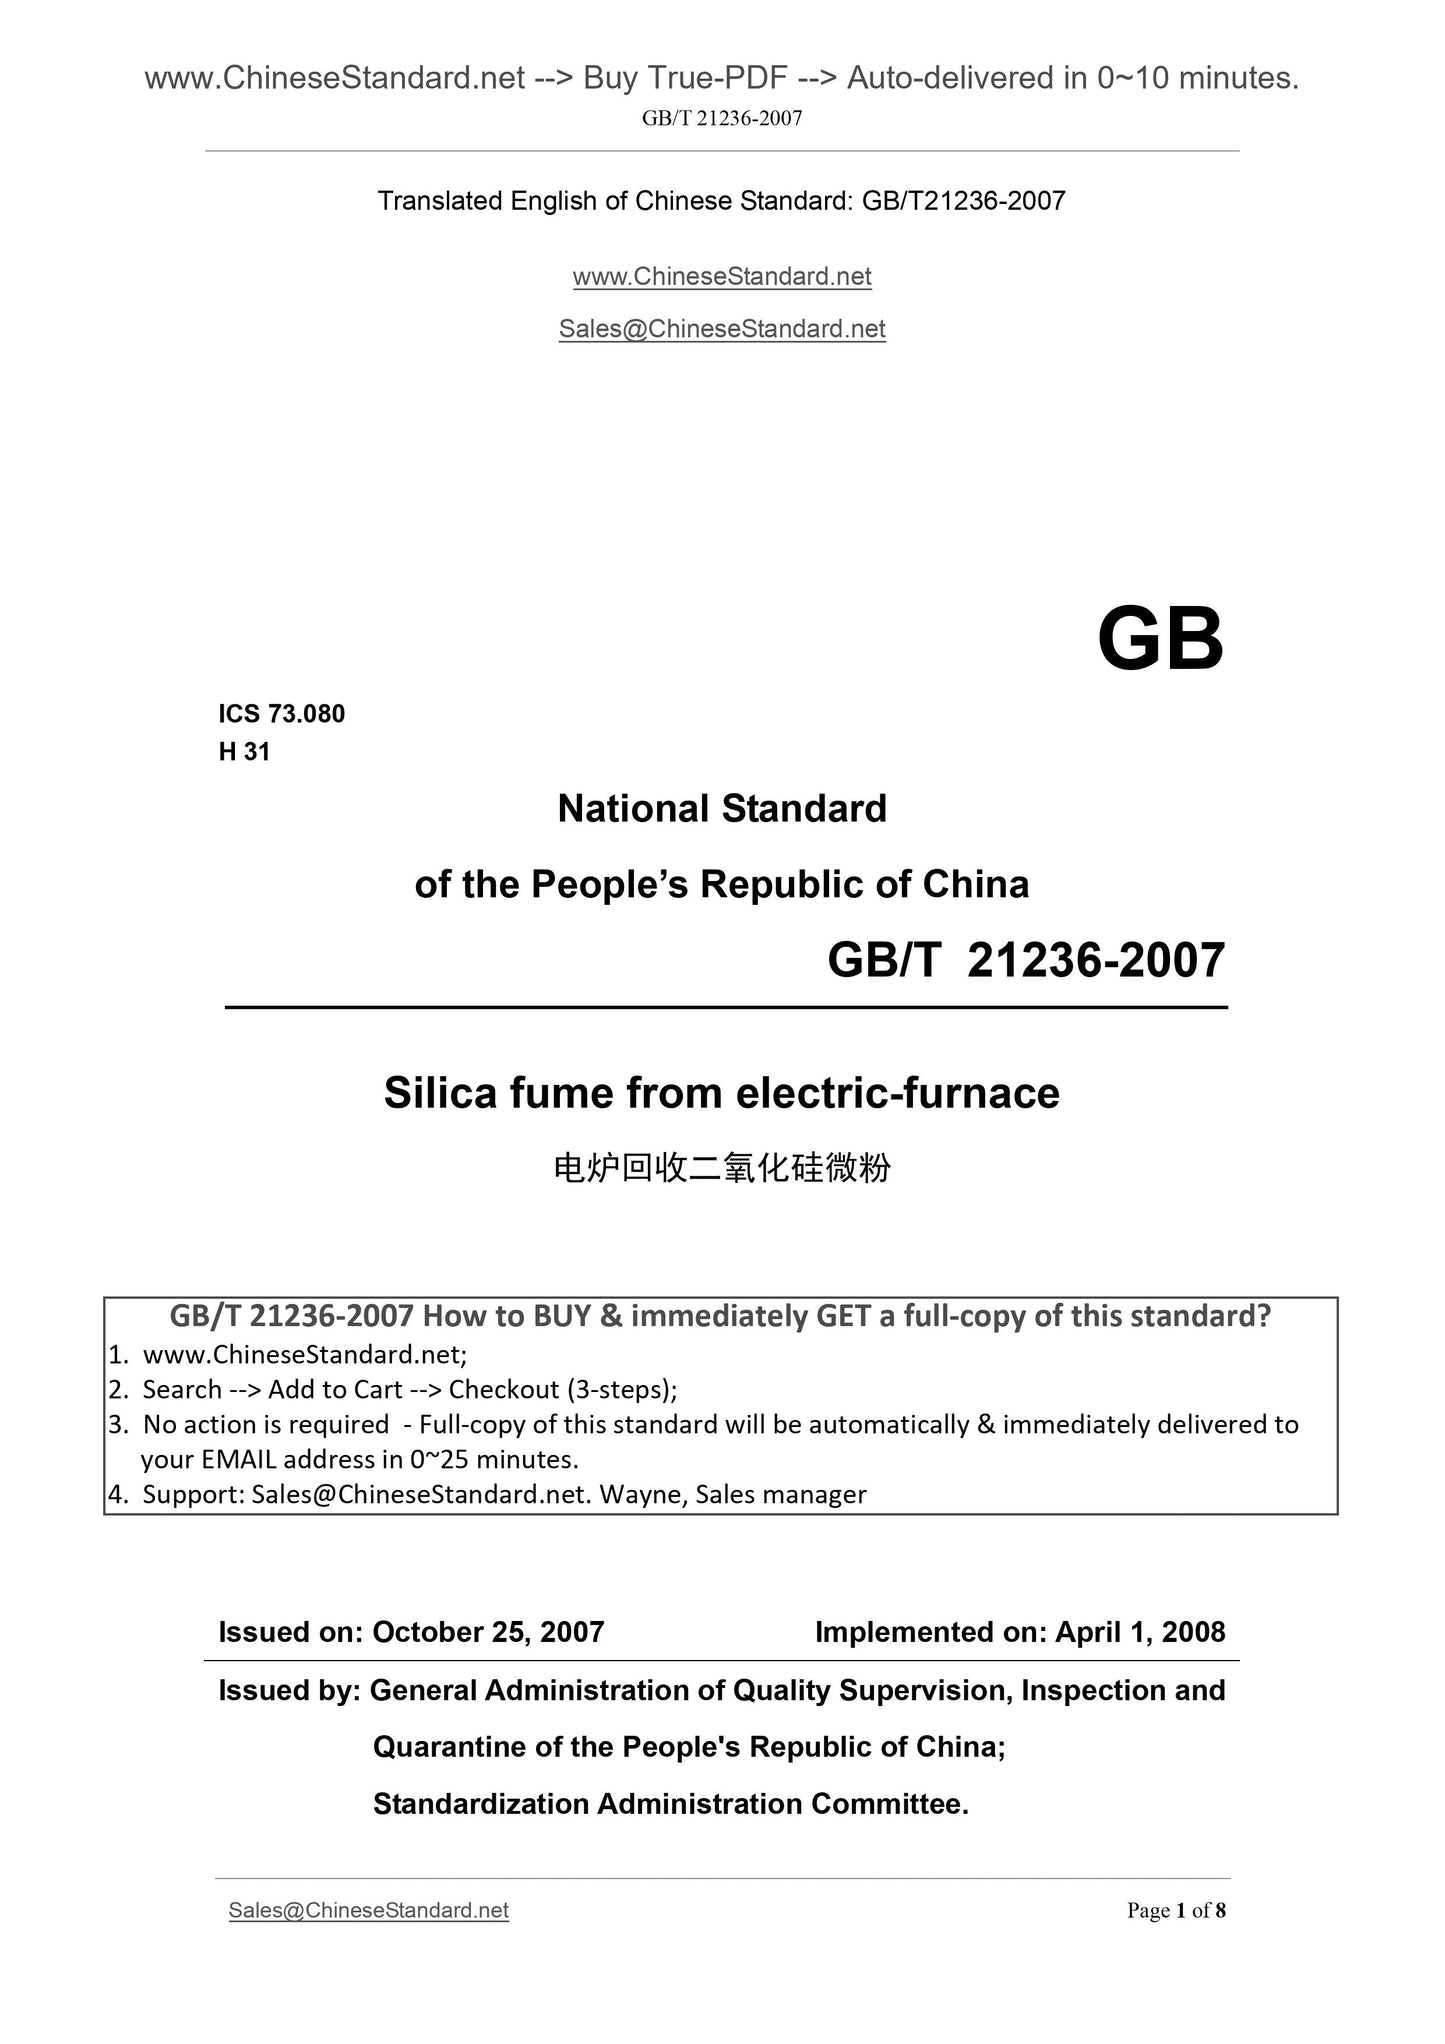 GB/T 21236-2007 Page 1